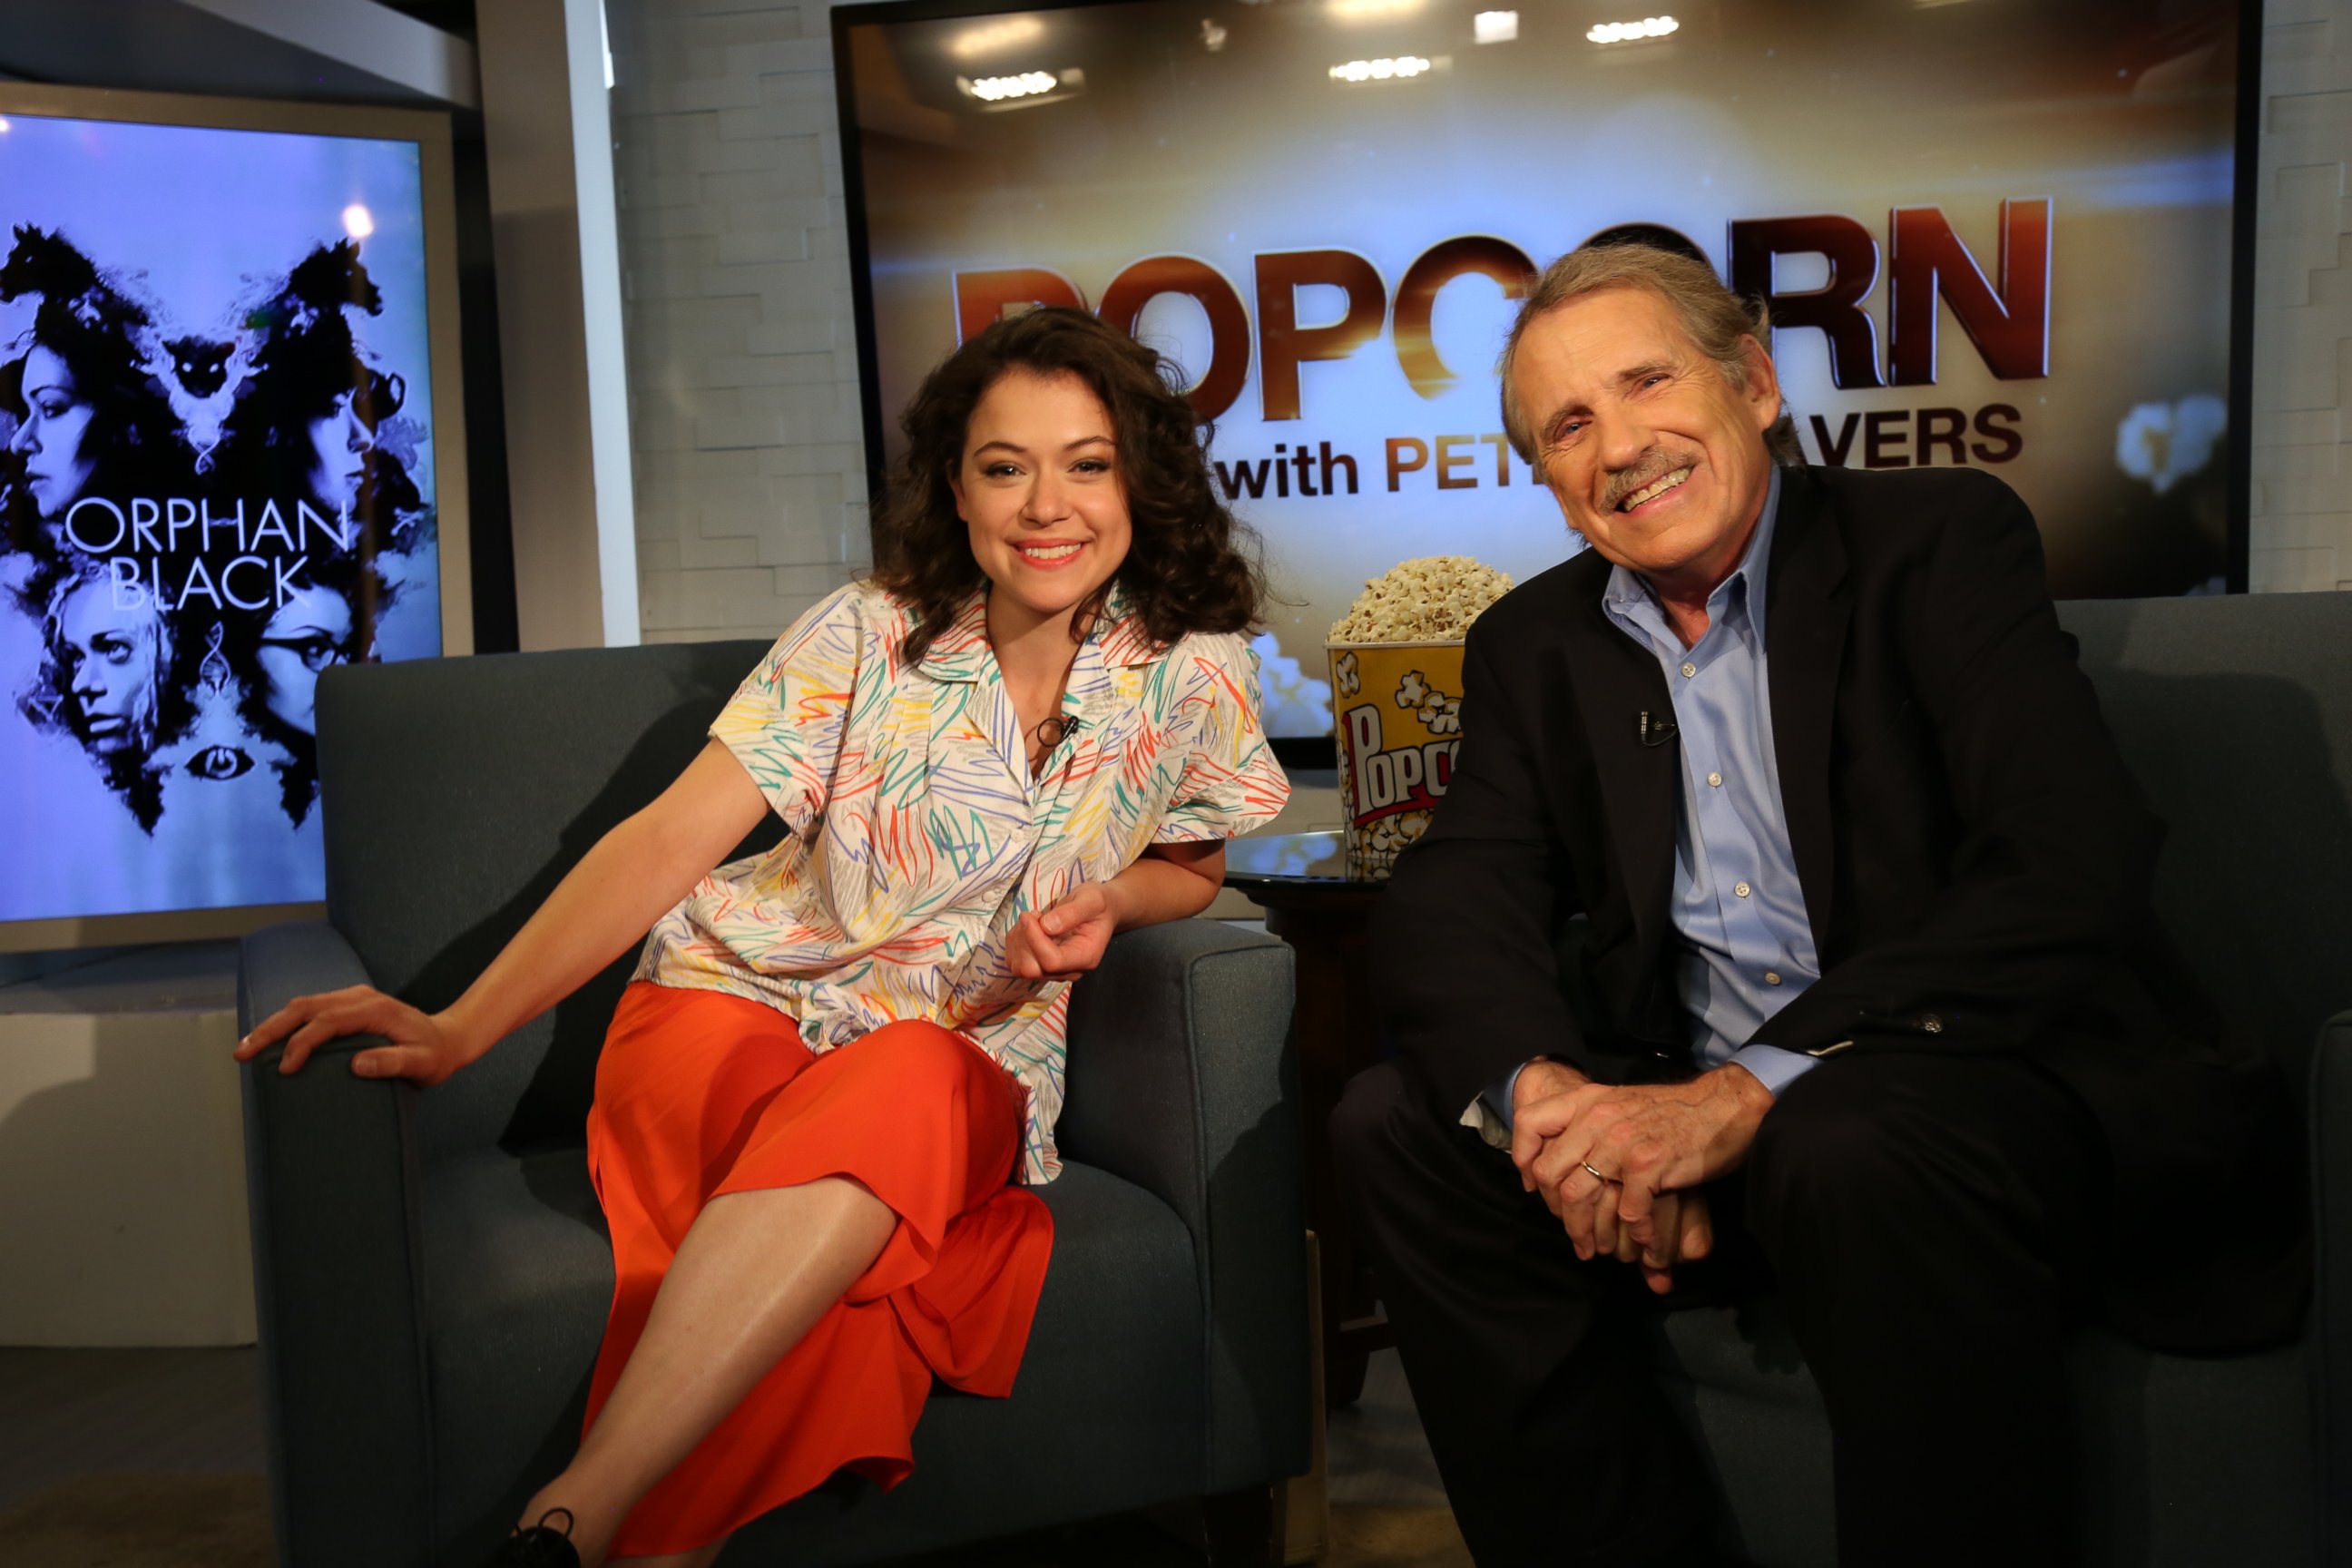 PHOTO: "Orphan Black" star Tatiana Maslany talks about her role on the show with Peter Travers on ABC News' "Popcorn With Peter Travers."